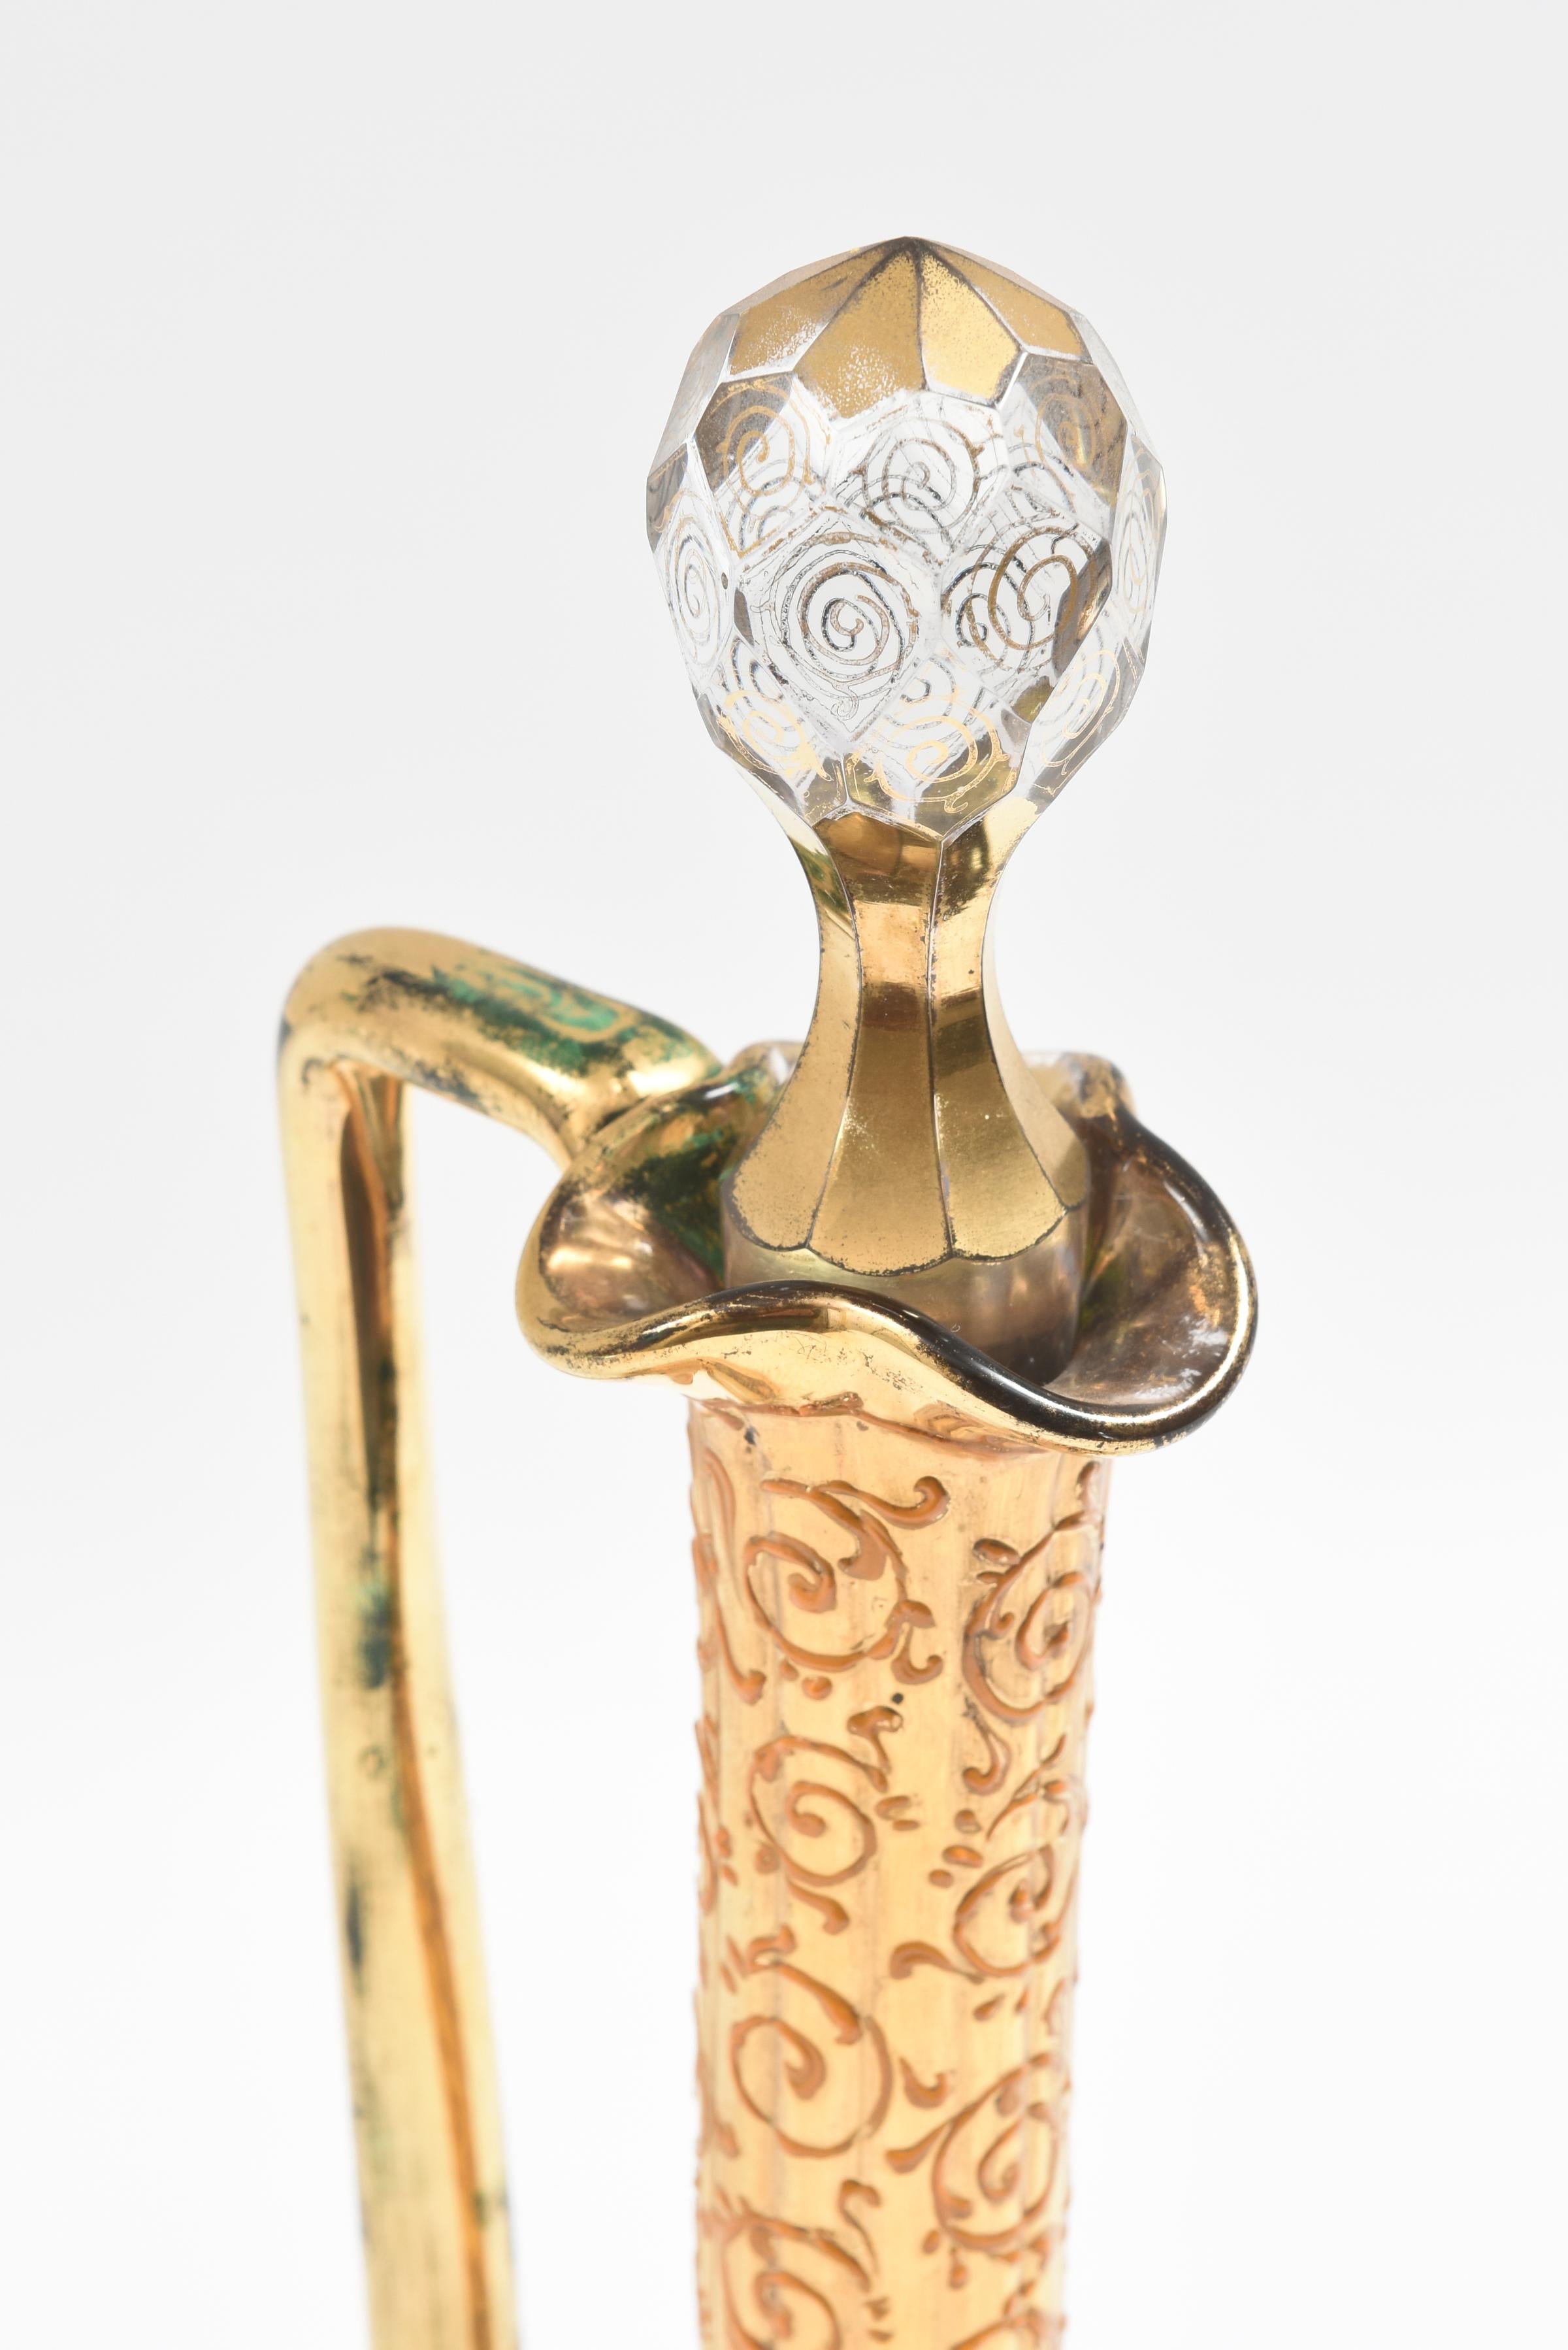 Hand-Crafted Antique Moser Ruby & Gilt Encrusted Wine Decanter, 19th Century Original Stopper